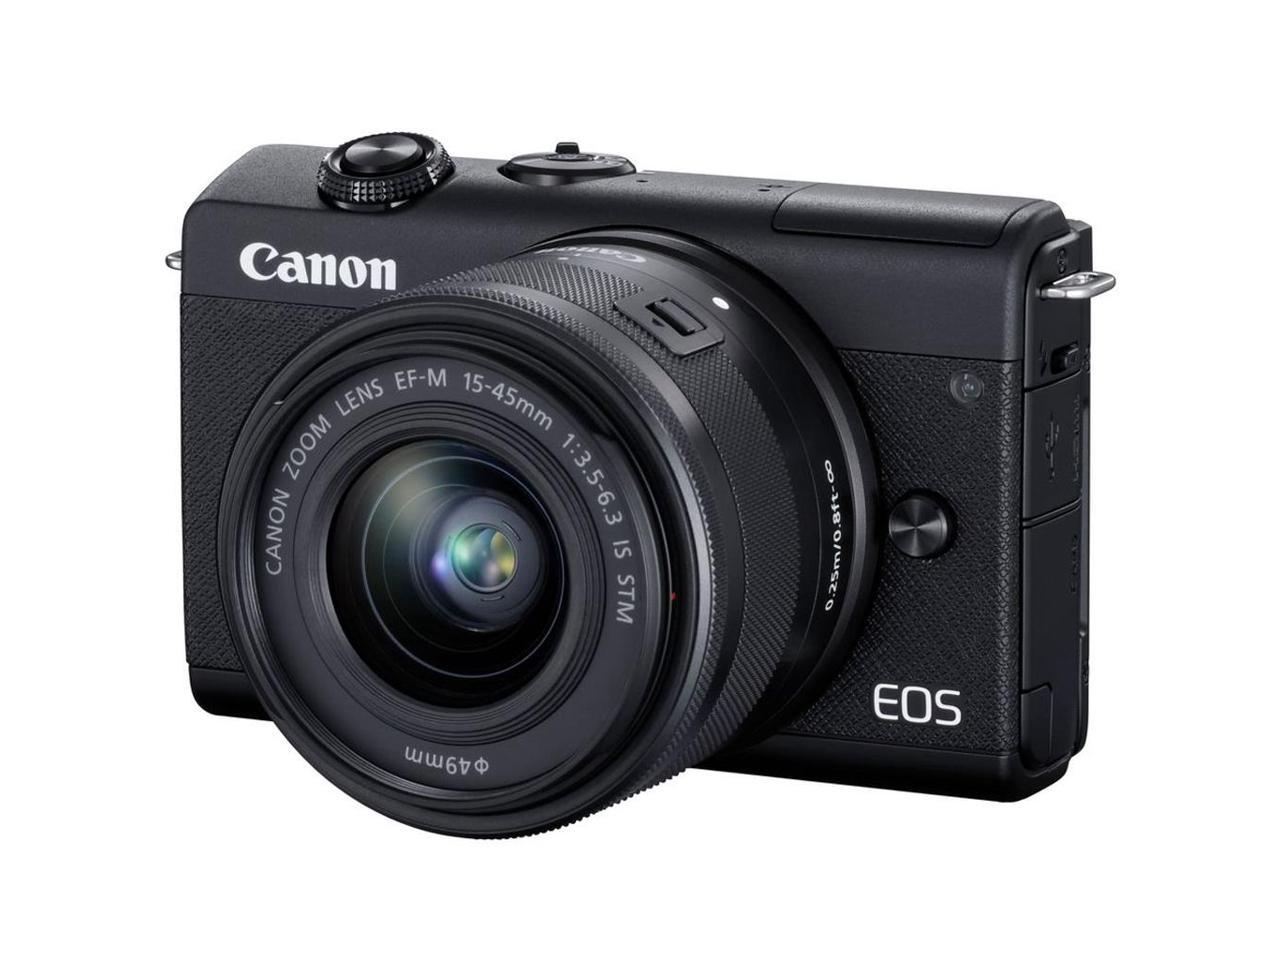 Canon EOS M200 24.2MP Mirrorless Digital Camera with EF-M 15-45mm IS STM Lens (Black)